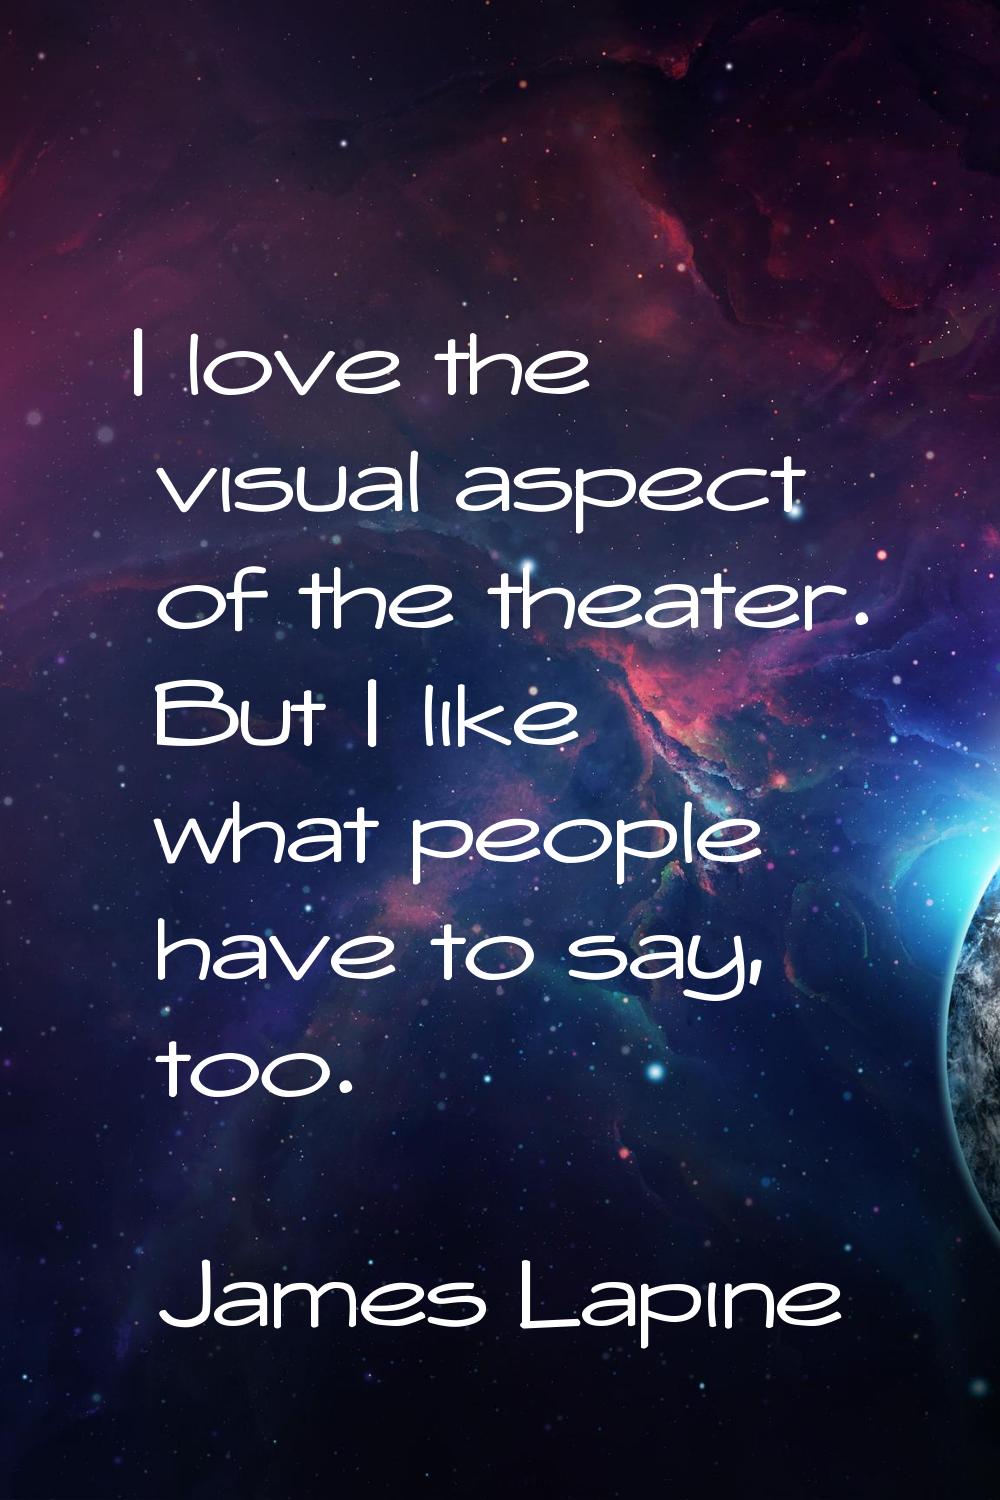 I love the visual aspect of the theater. But I like what people have to say, too.